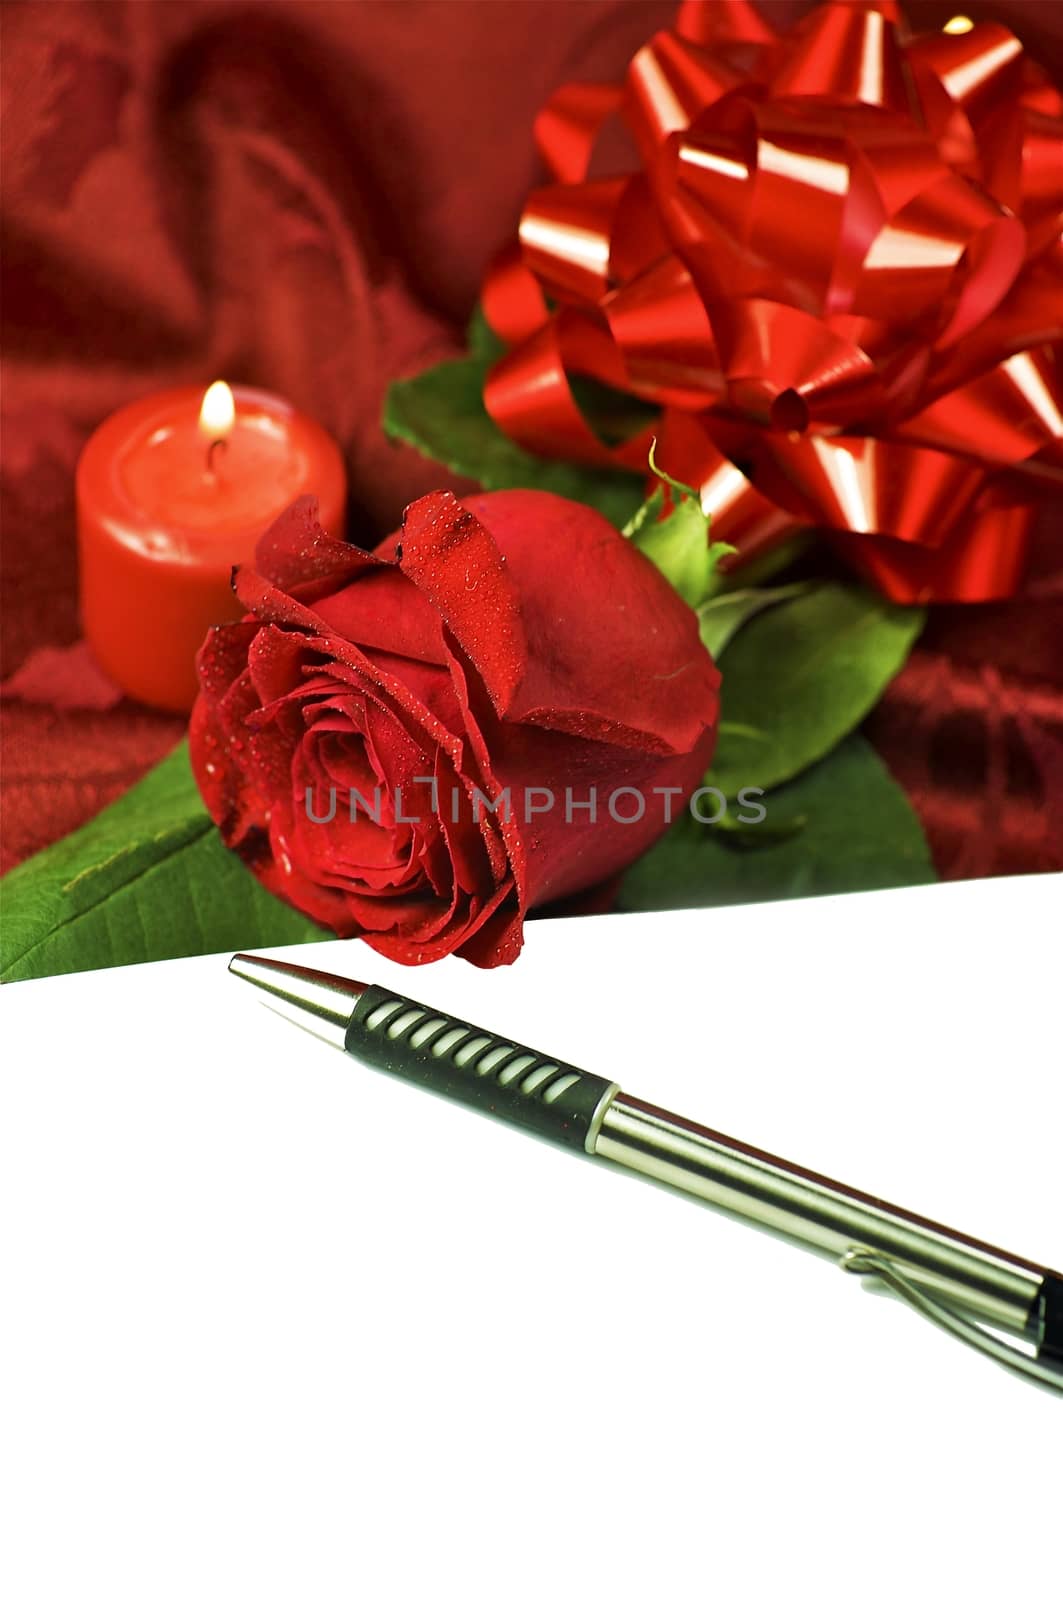 The Love Letter. White Paper, Pen, Red Rose, Red Glossy Bow and Red burning Candle. Valentine\'s Day Theme with Copy Space